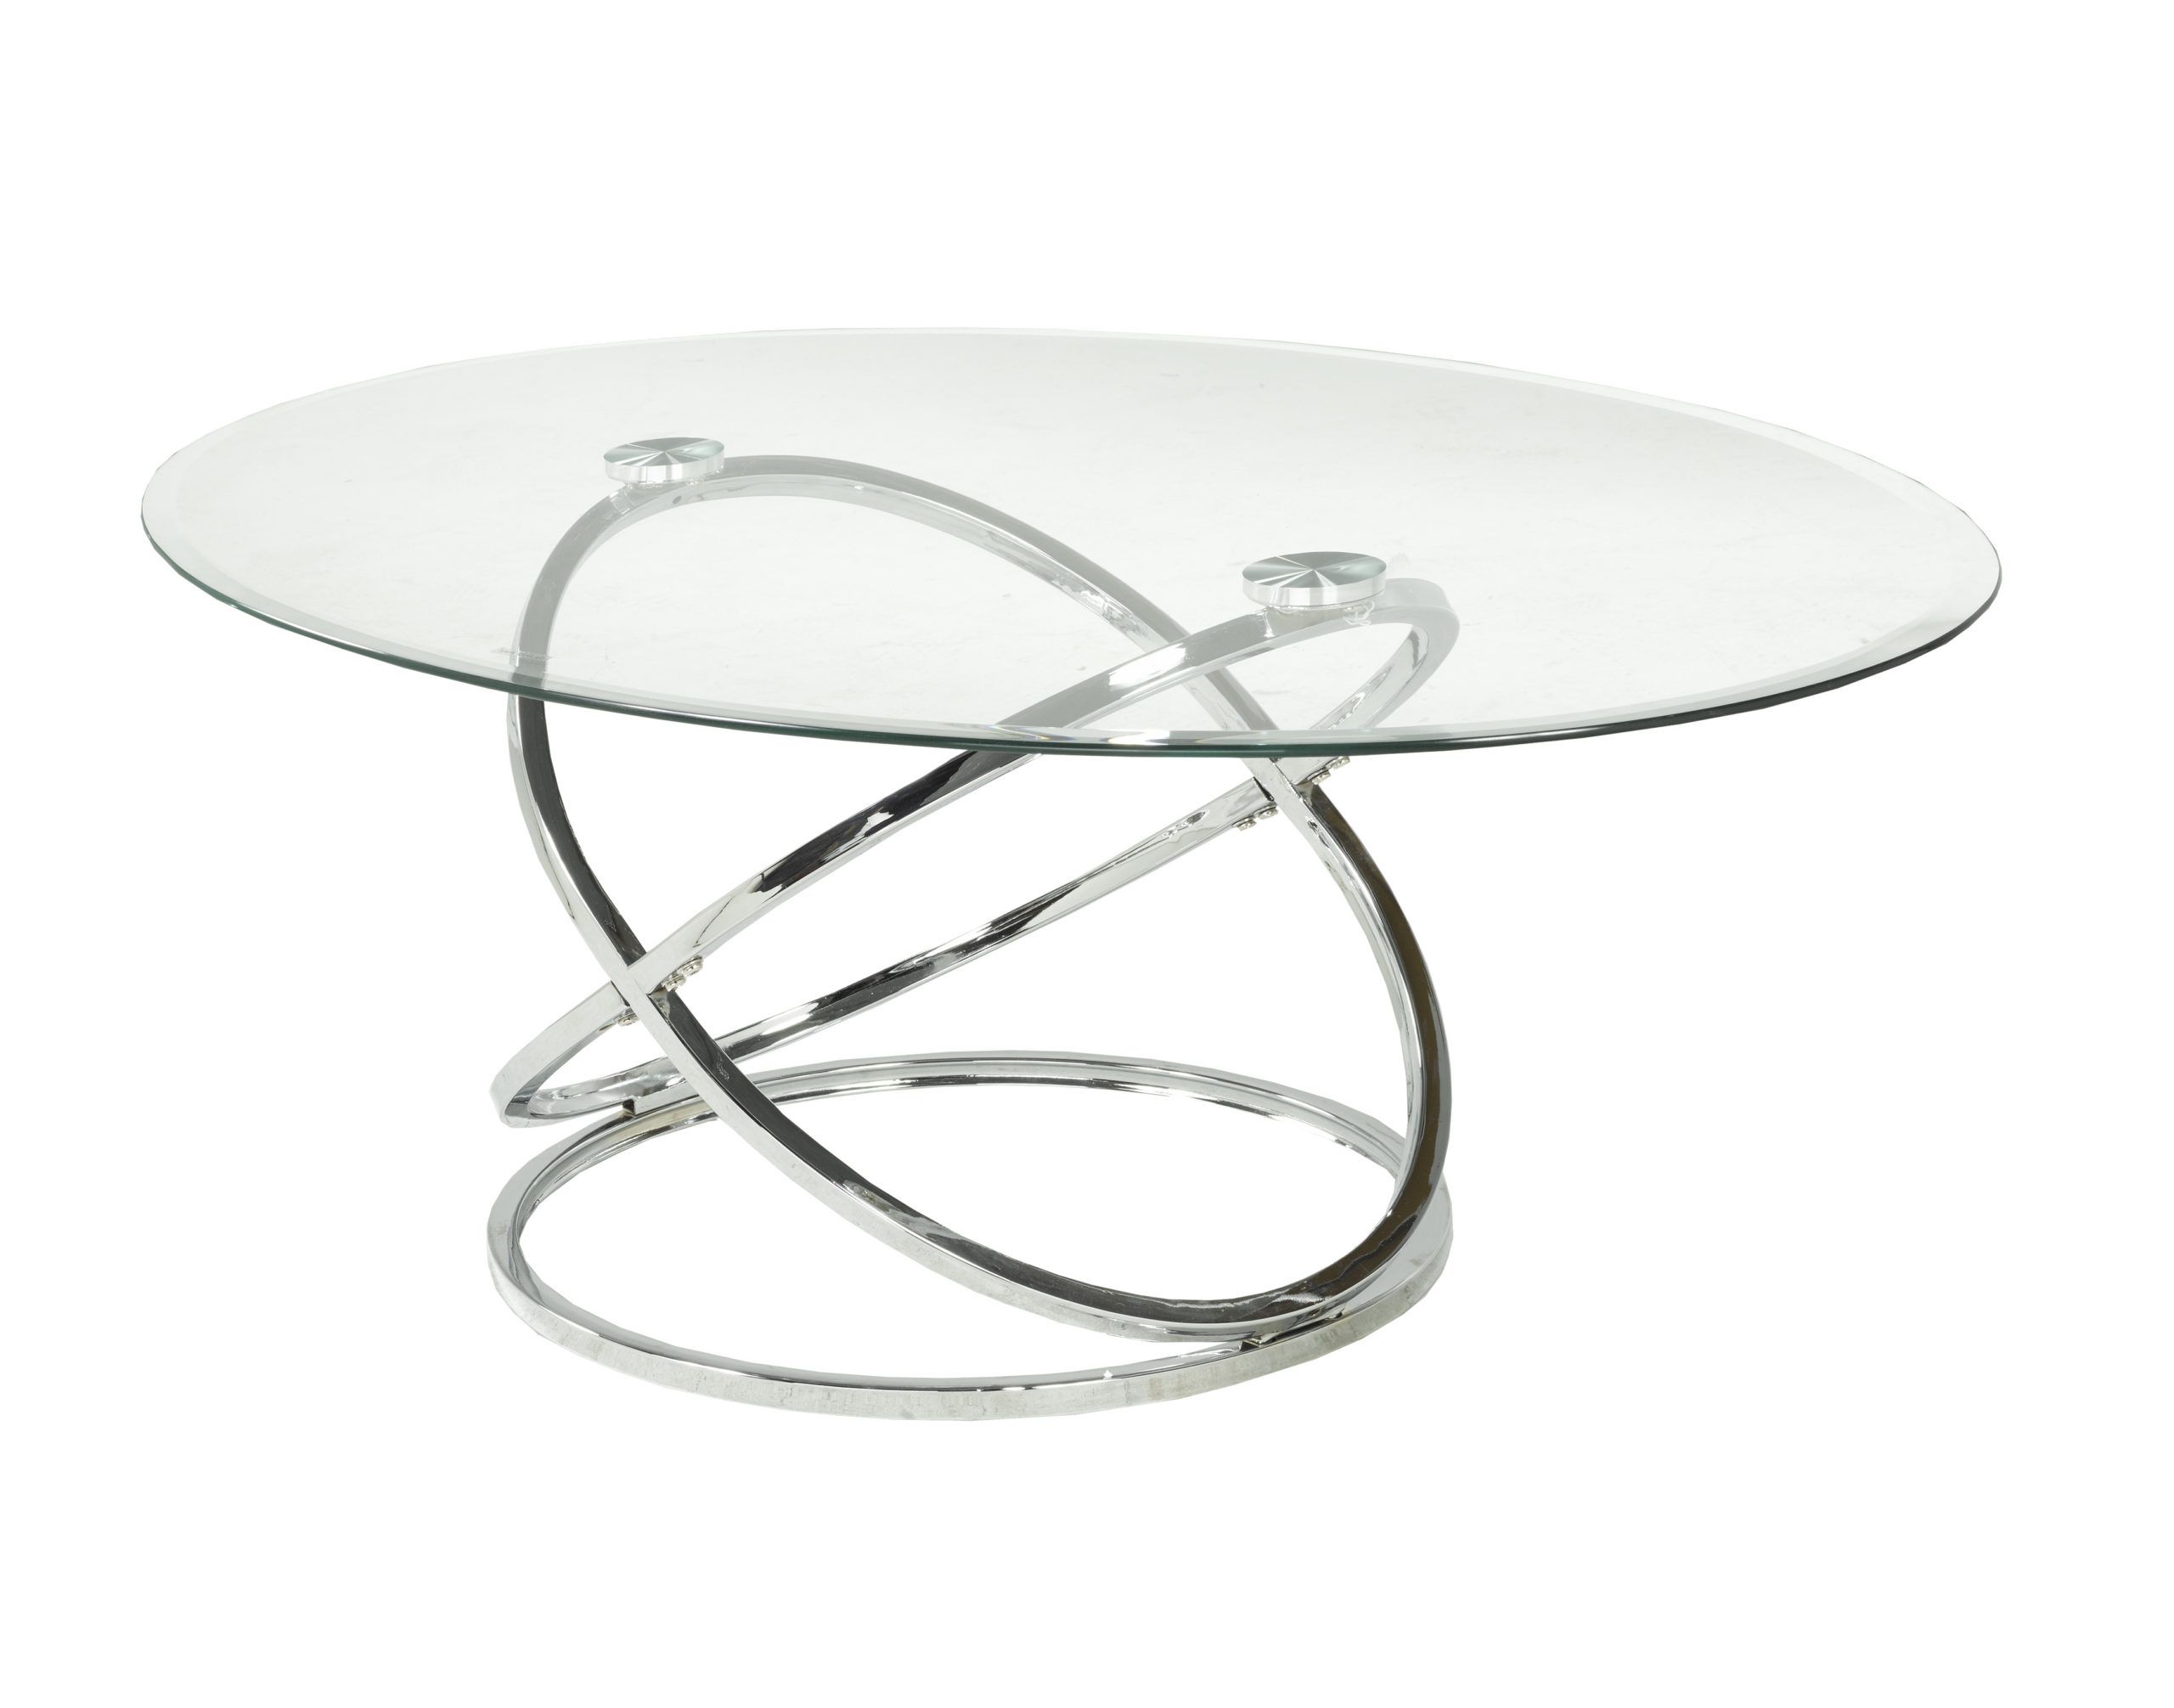 Modern Oval Glass And Chrome Occasional Tables – Arrow Furniture In Glass Oval Coffee Tables (View 3 of 20)